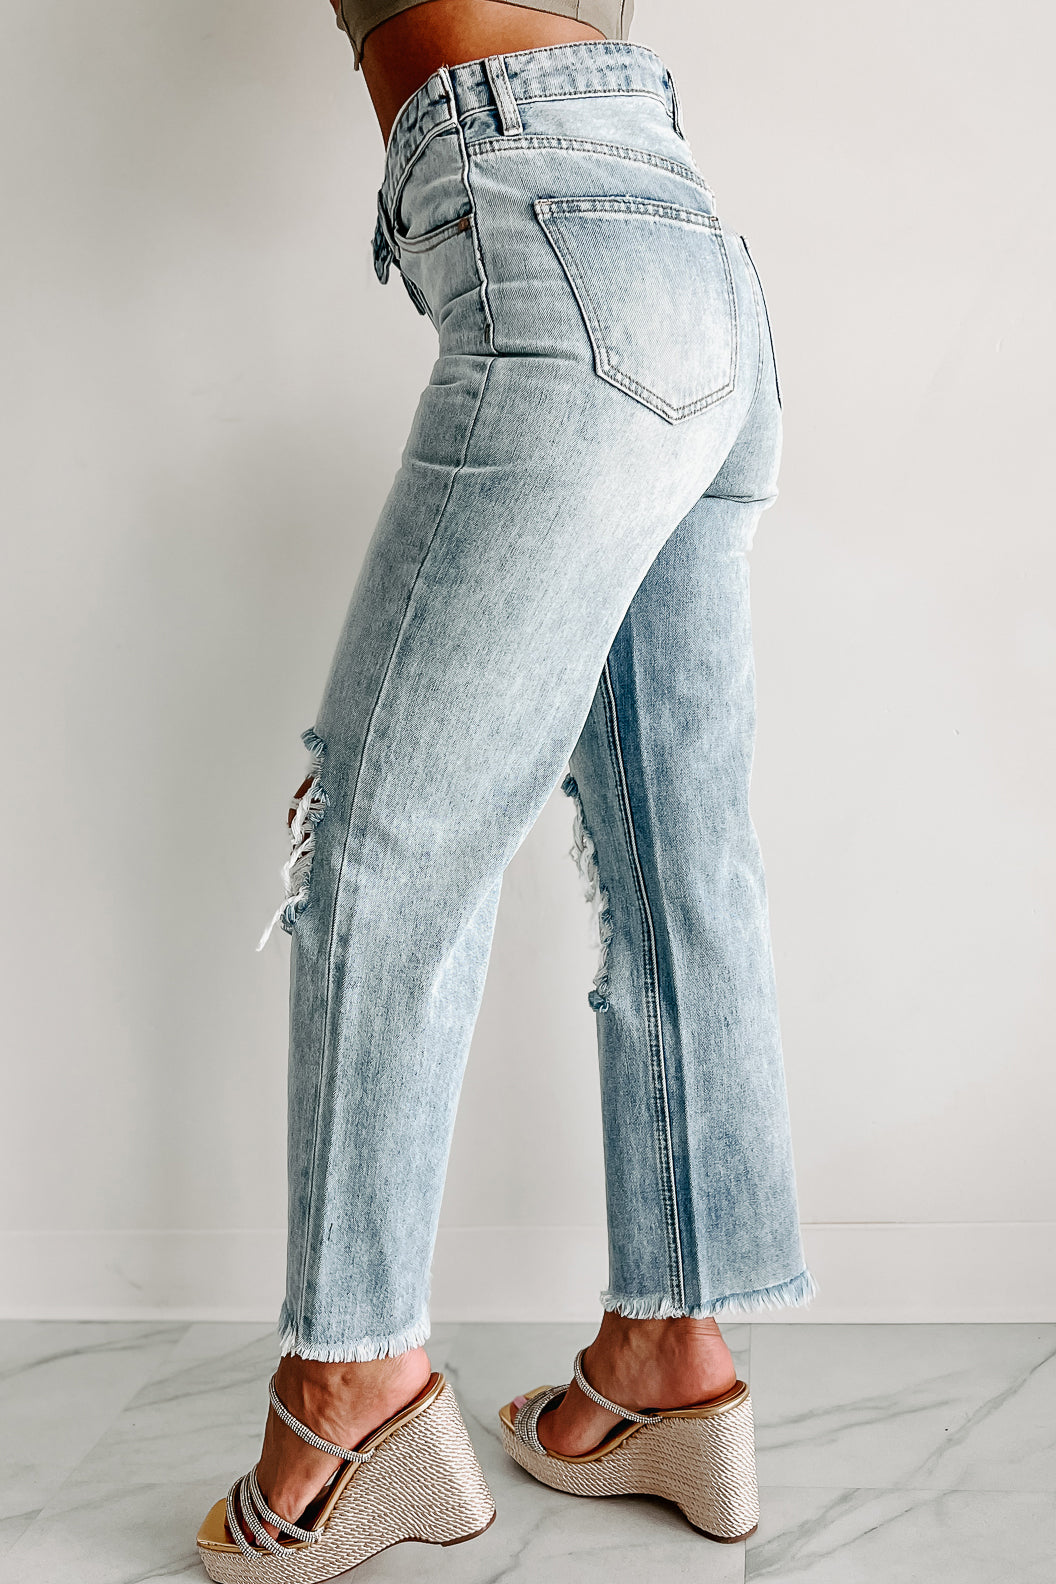 THE LIA HIGH RISE STRAIGHT LEG JEANS IN LIGHT WASH